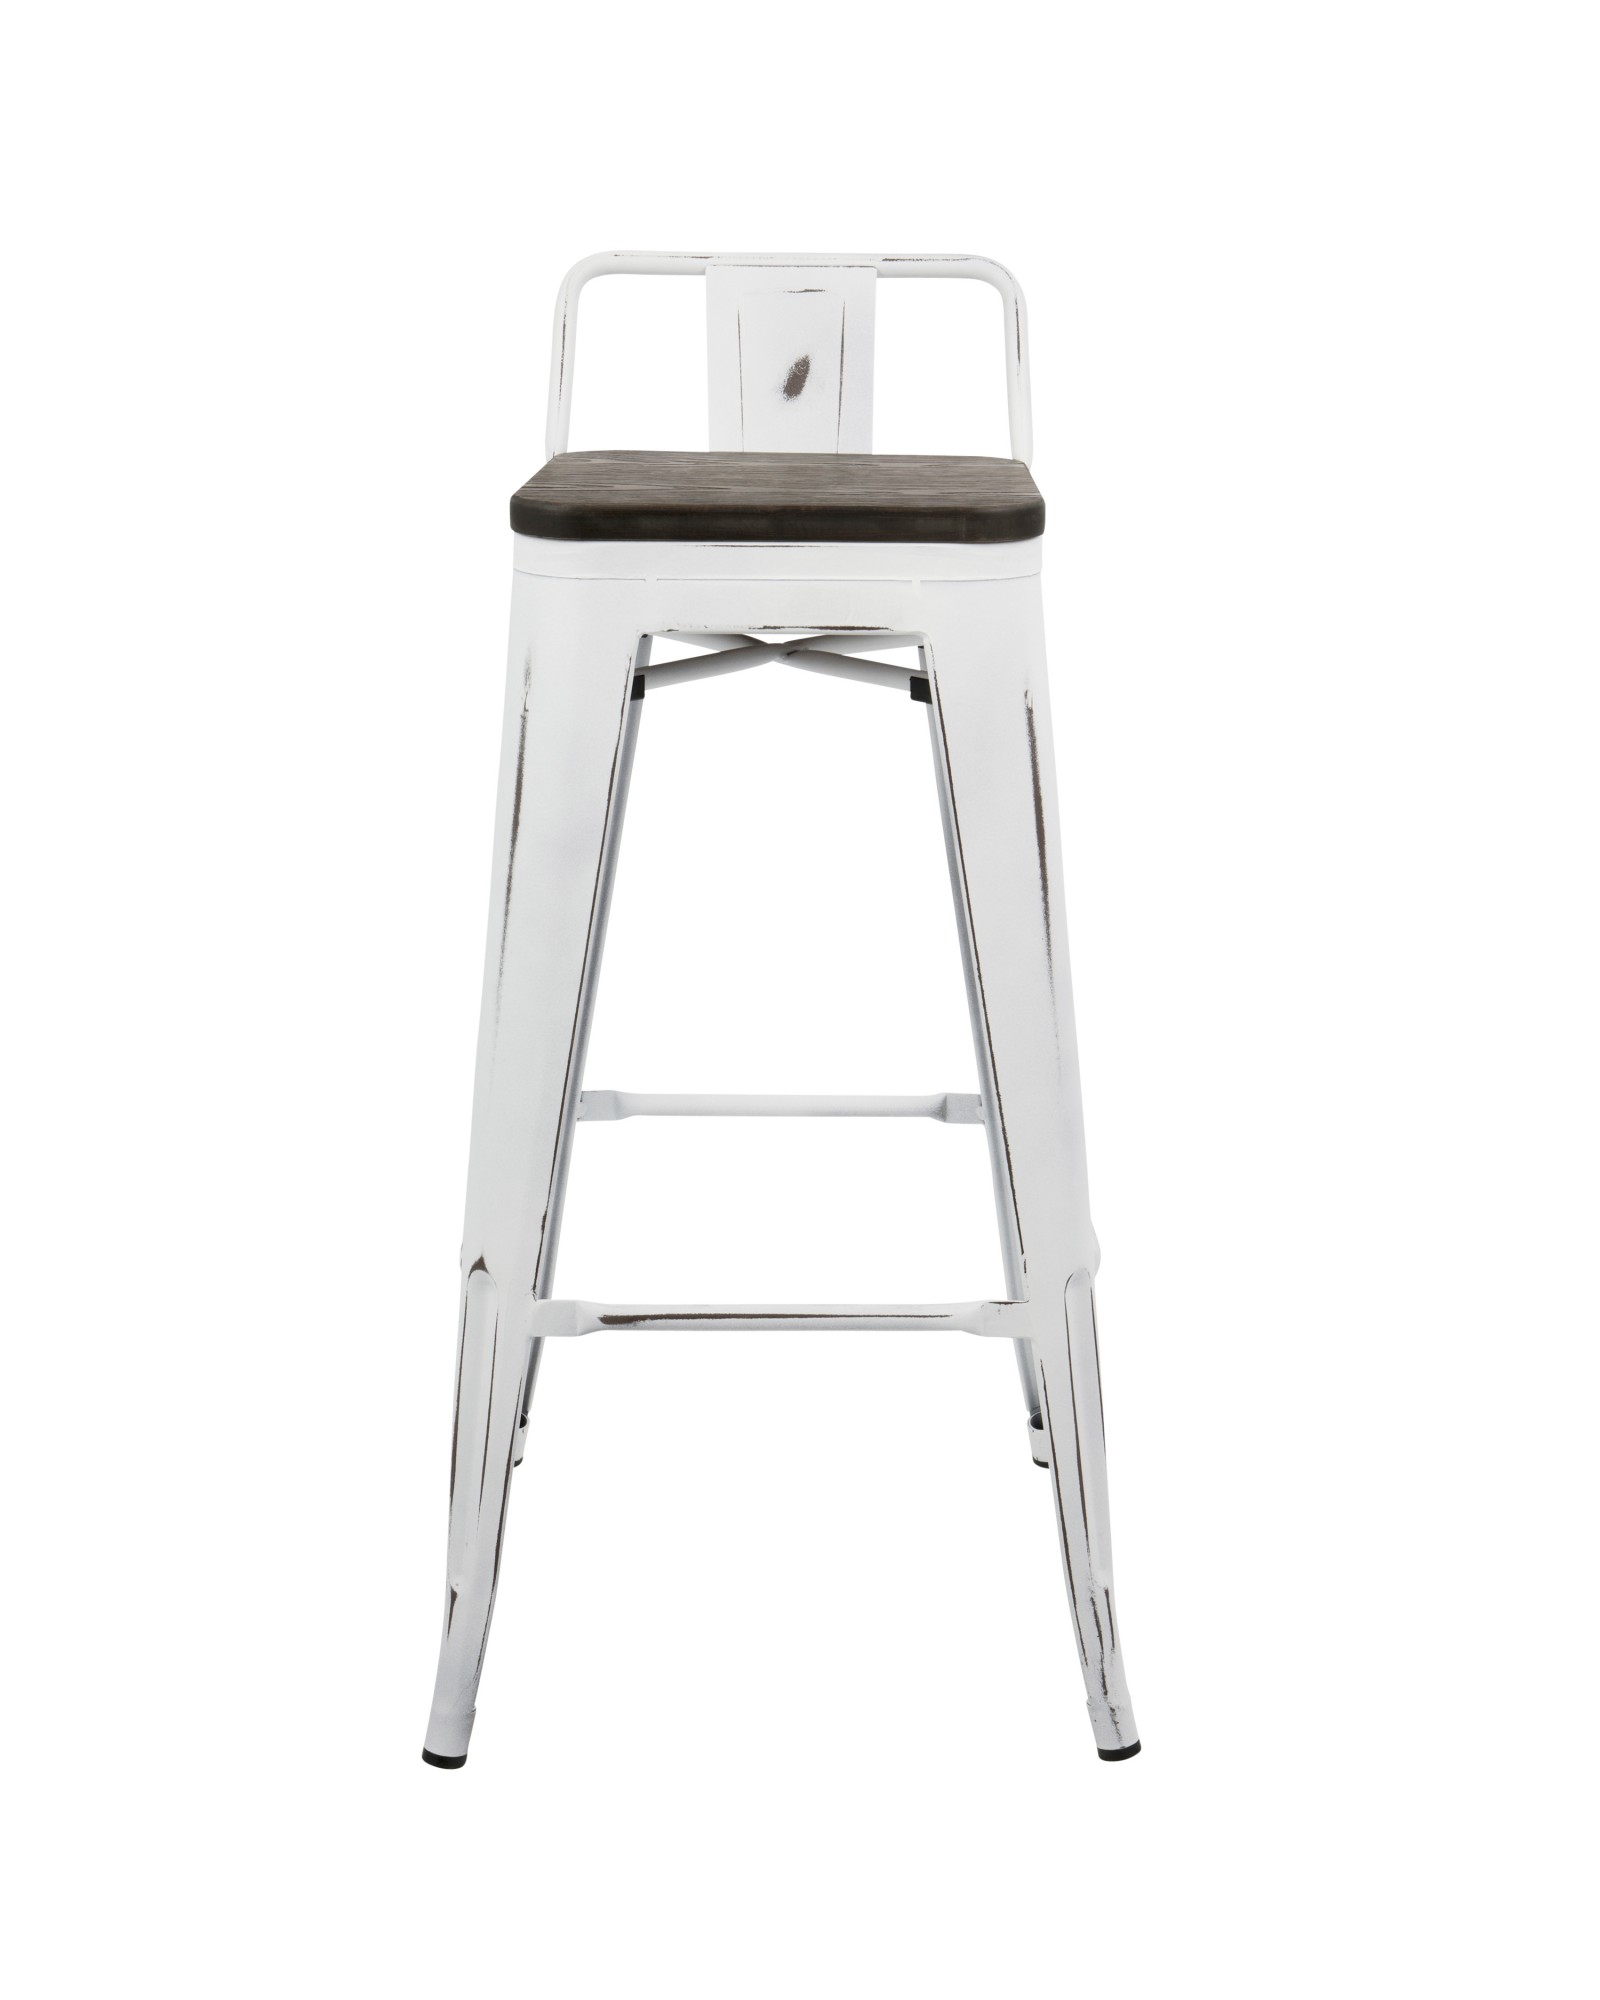 Oregon Industrial Low Back Barstool in Vintage White and Espresso - Set of 2